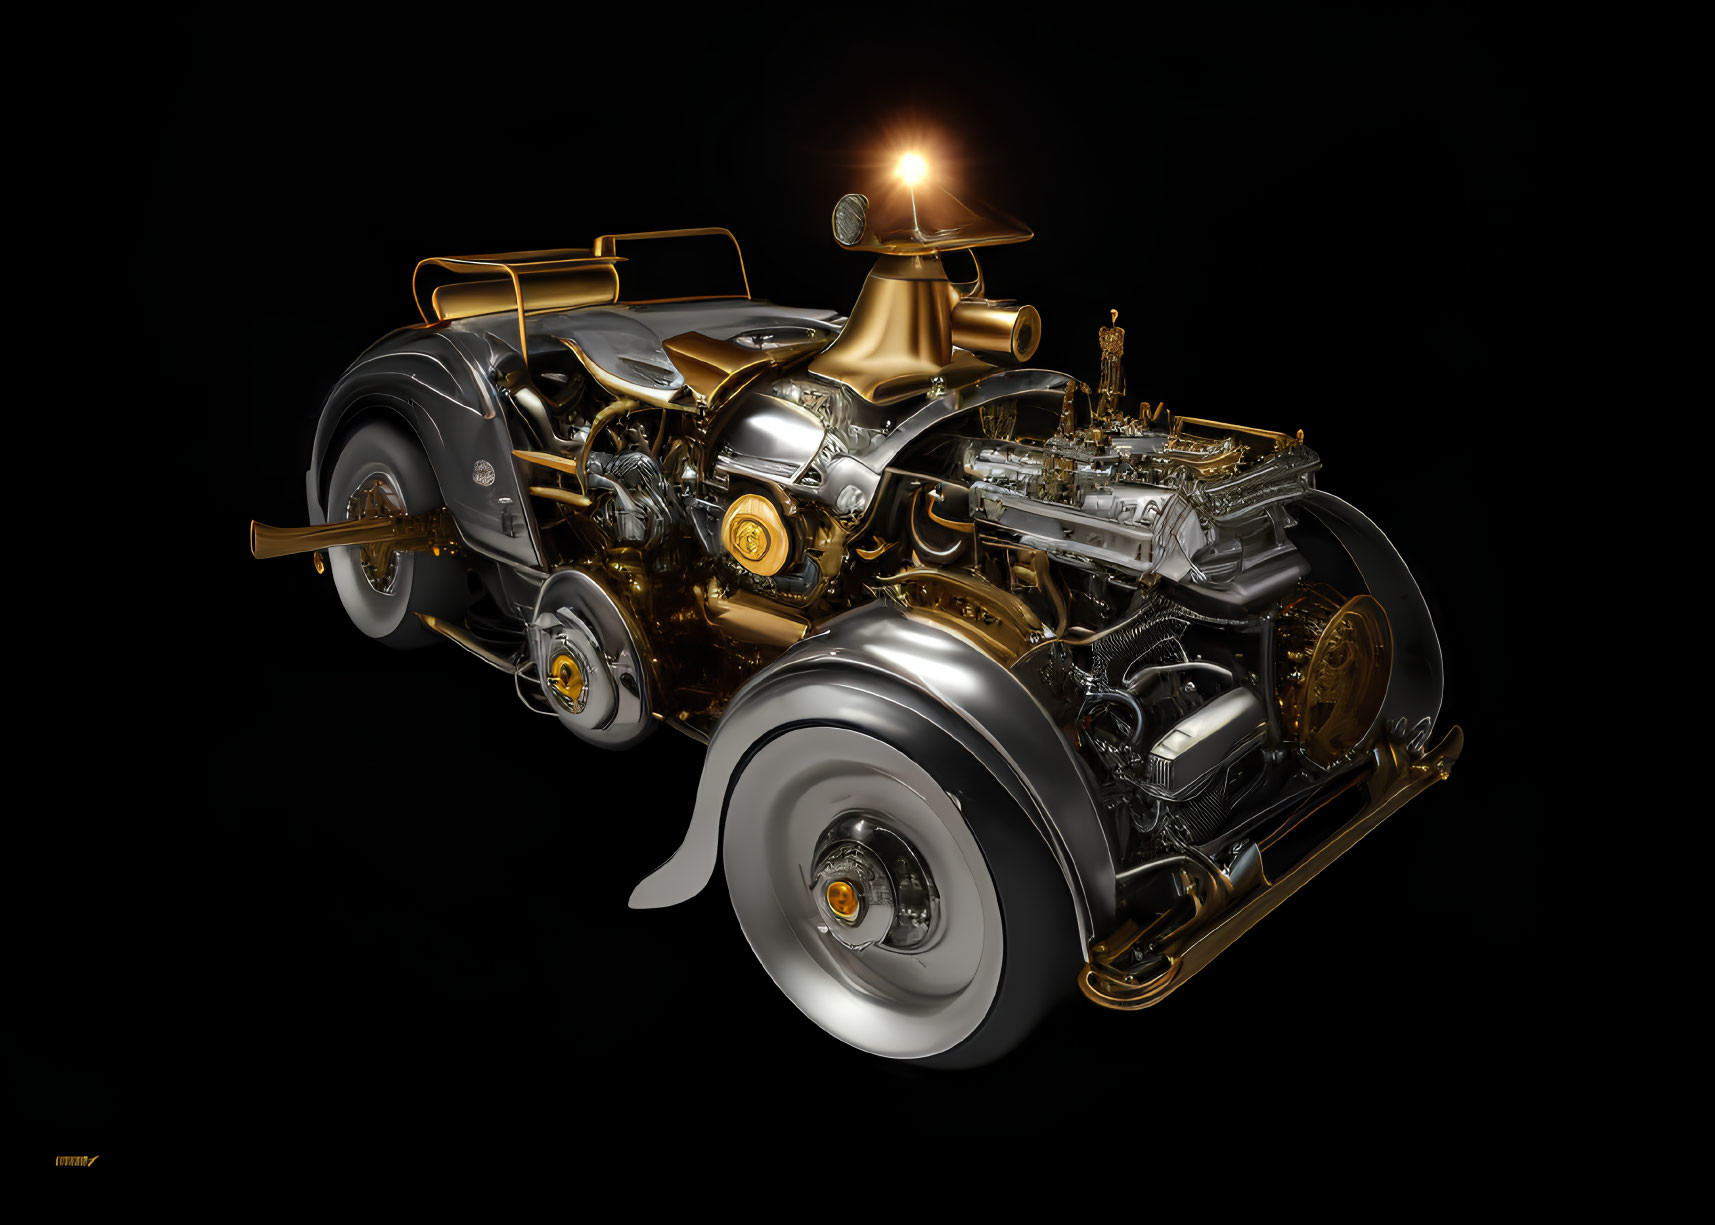 Vintage Car Featuring Exposed Golden Engine Components on Black Background